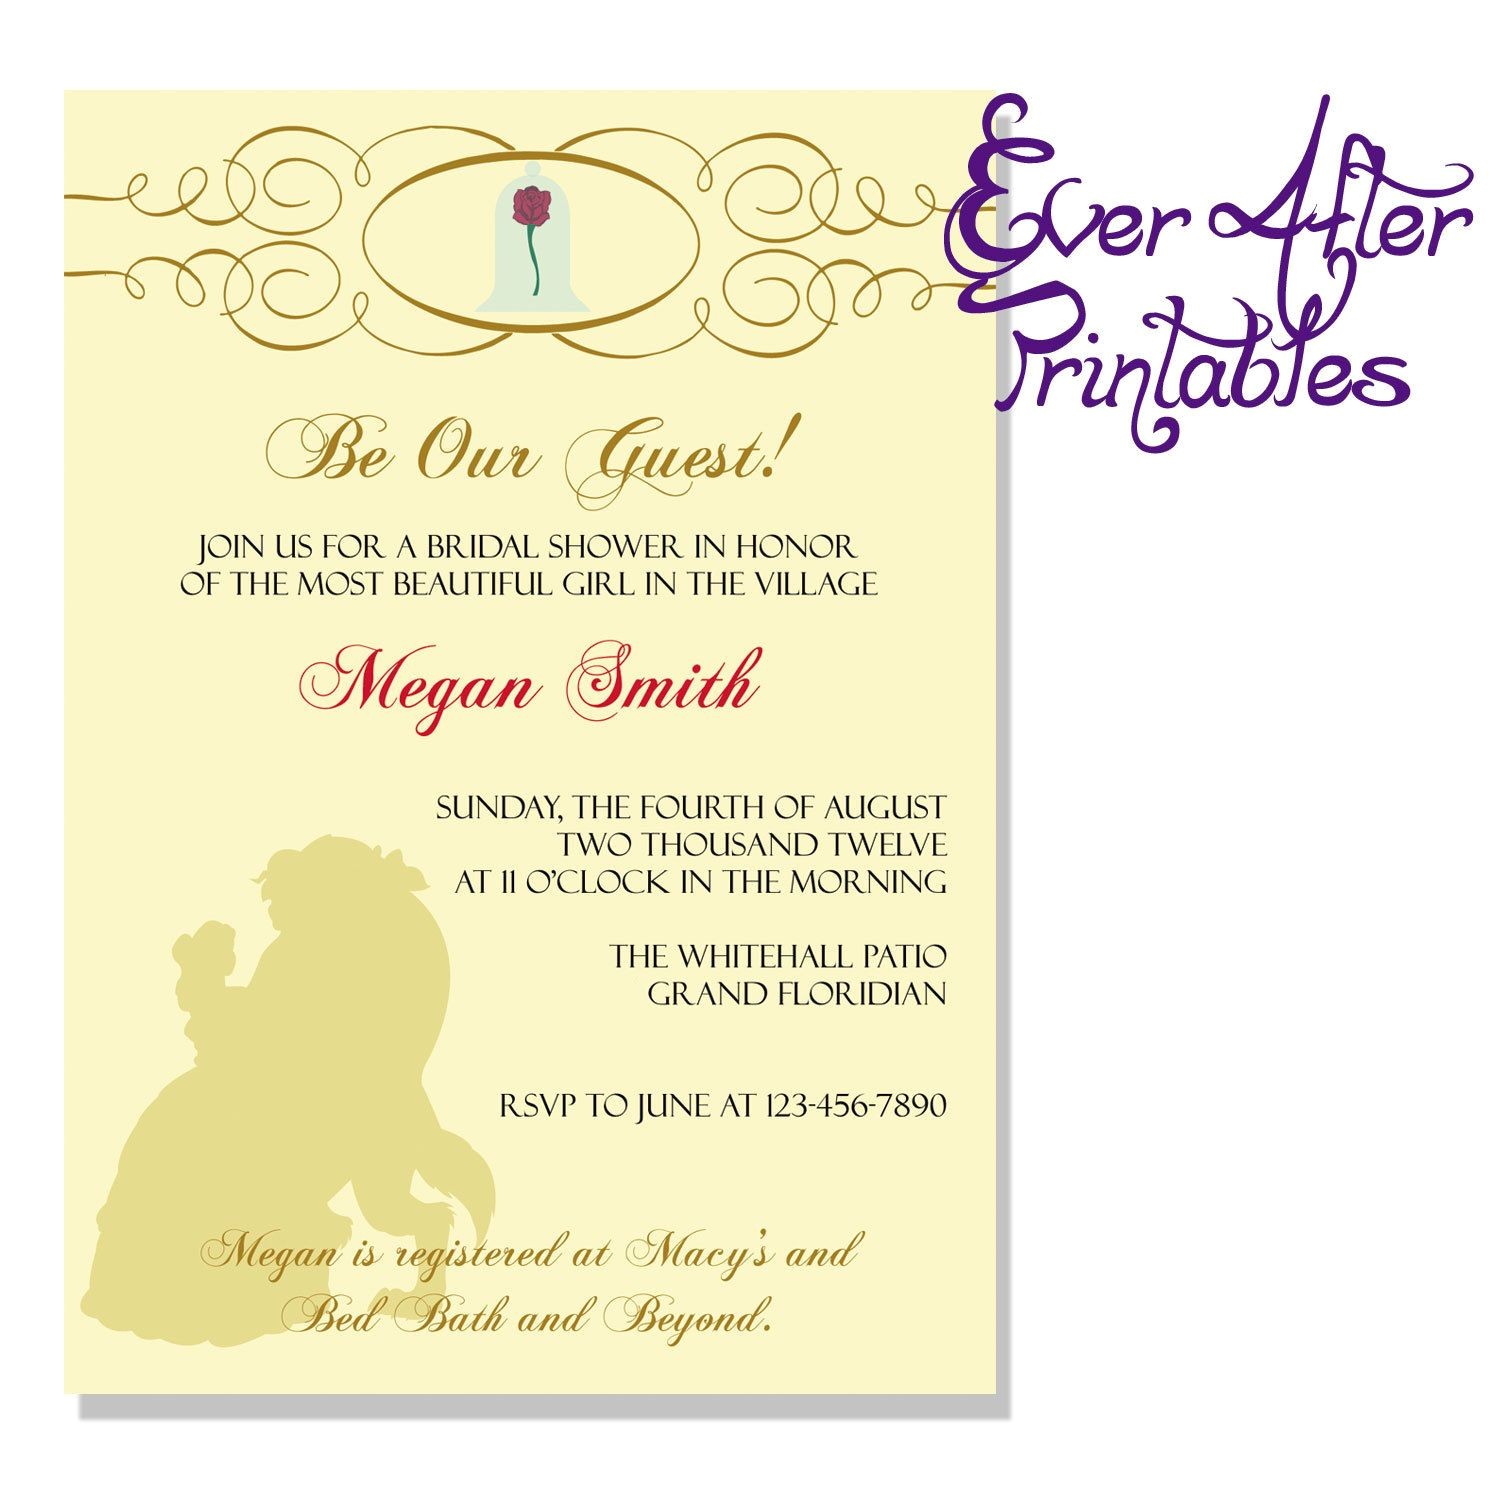 Beauty and the Beast Bridal Shower Invitations Beauty and the Beast Invite Disney Wedding Beauty and